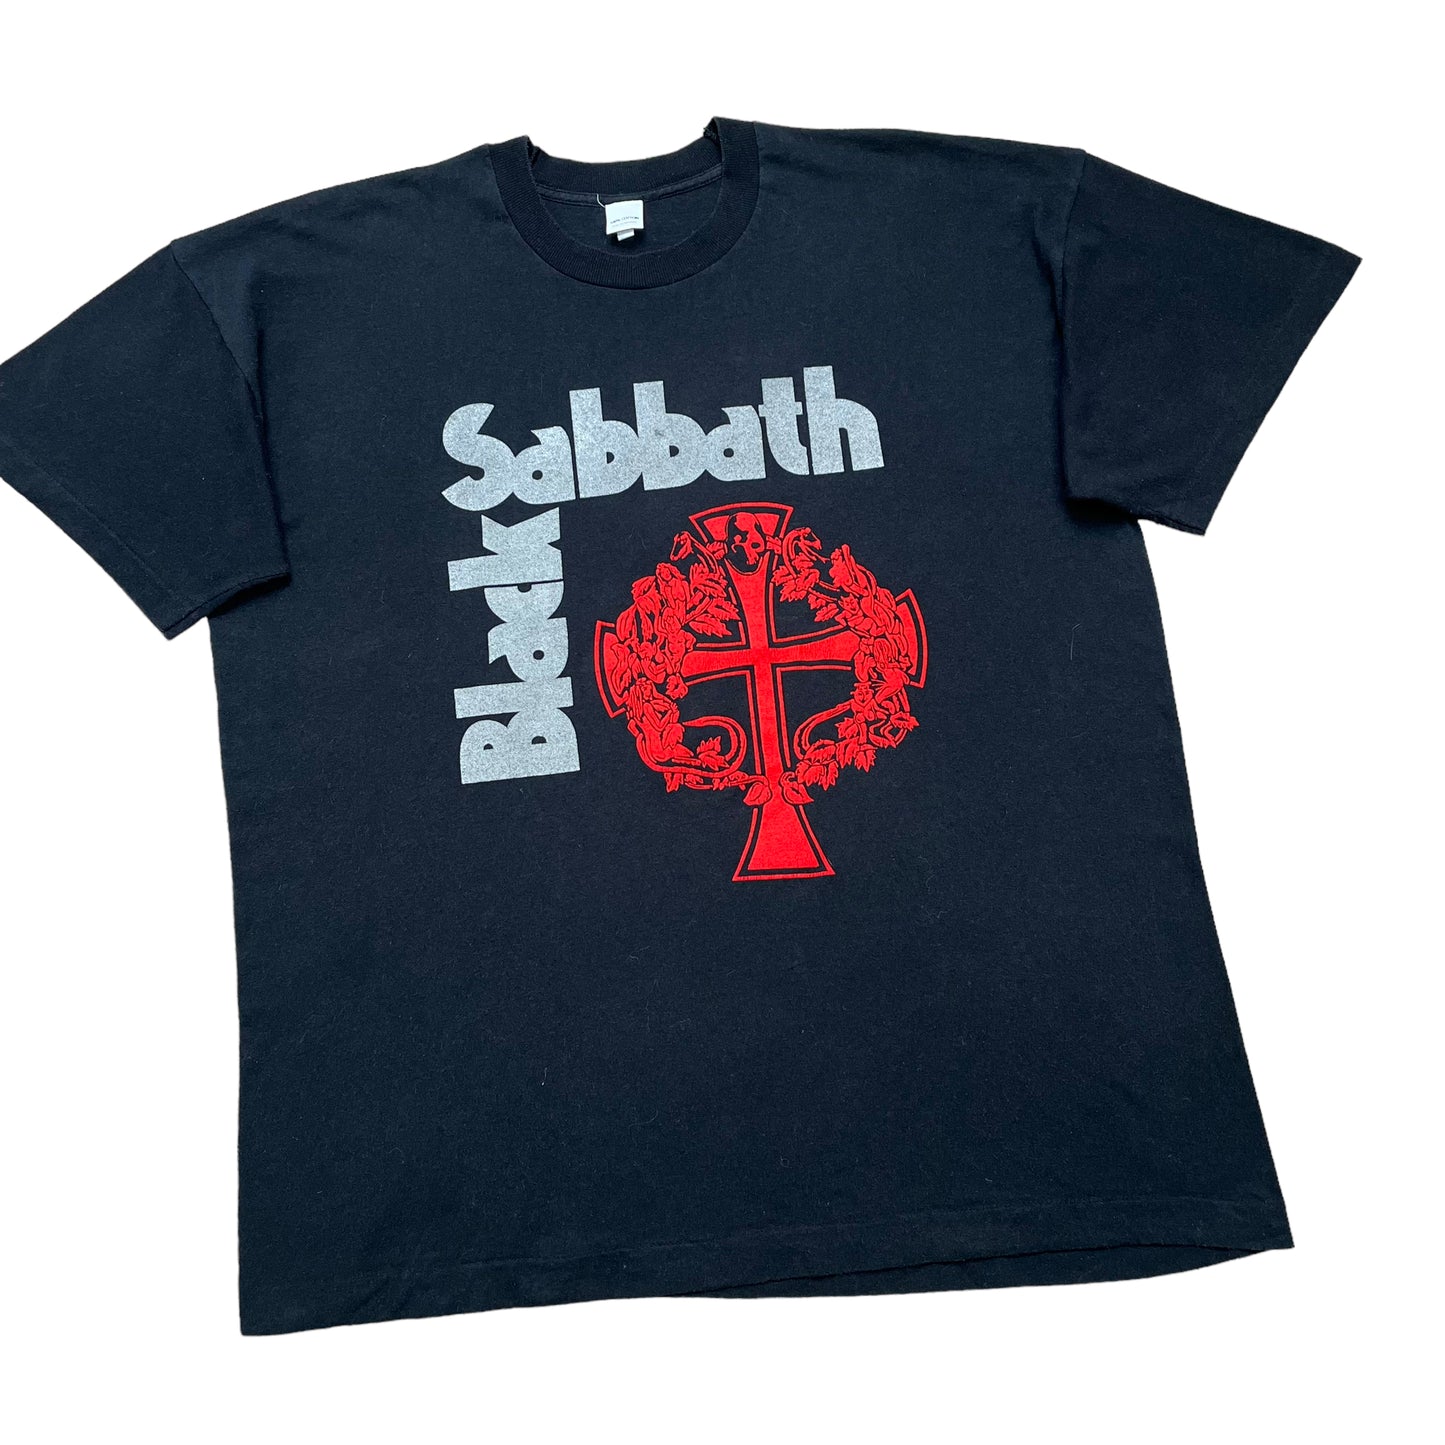 Early 90s Black Sabbath ‘We Sold Our Souls’ (XL)